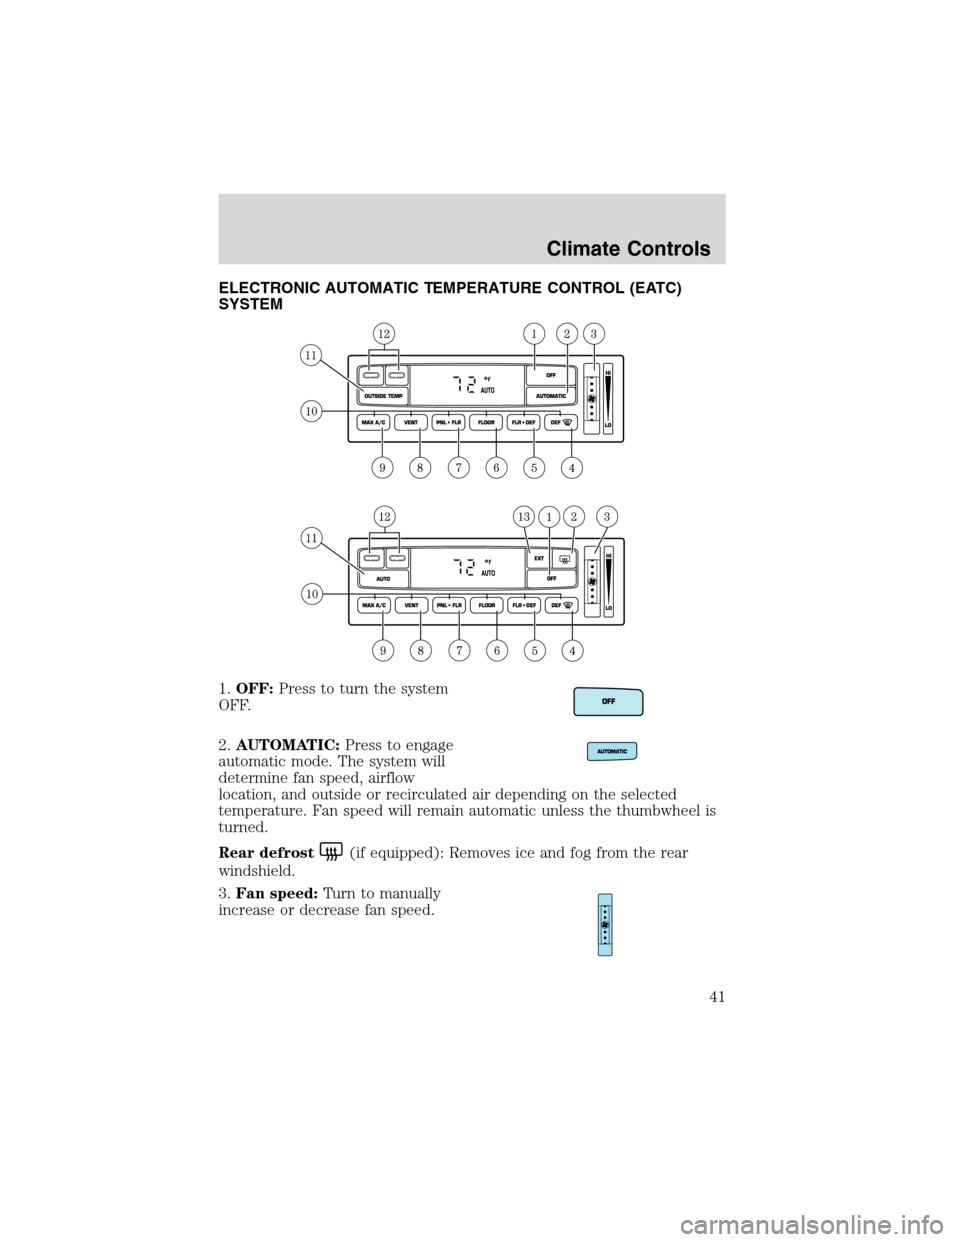 FORD F150 2003 10.G Owners Manual ELECTRONIC AUTOMATIC TEMPERATURE CONTROL (EATC)
SYSTEM
1.OFF:Press to turn the system
OFF.
2.AUTOMATIC:Press to engage
automatic mode. The system will
determine fan speed, airflow
location, and outsid